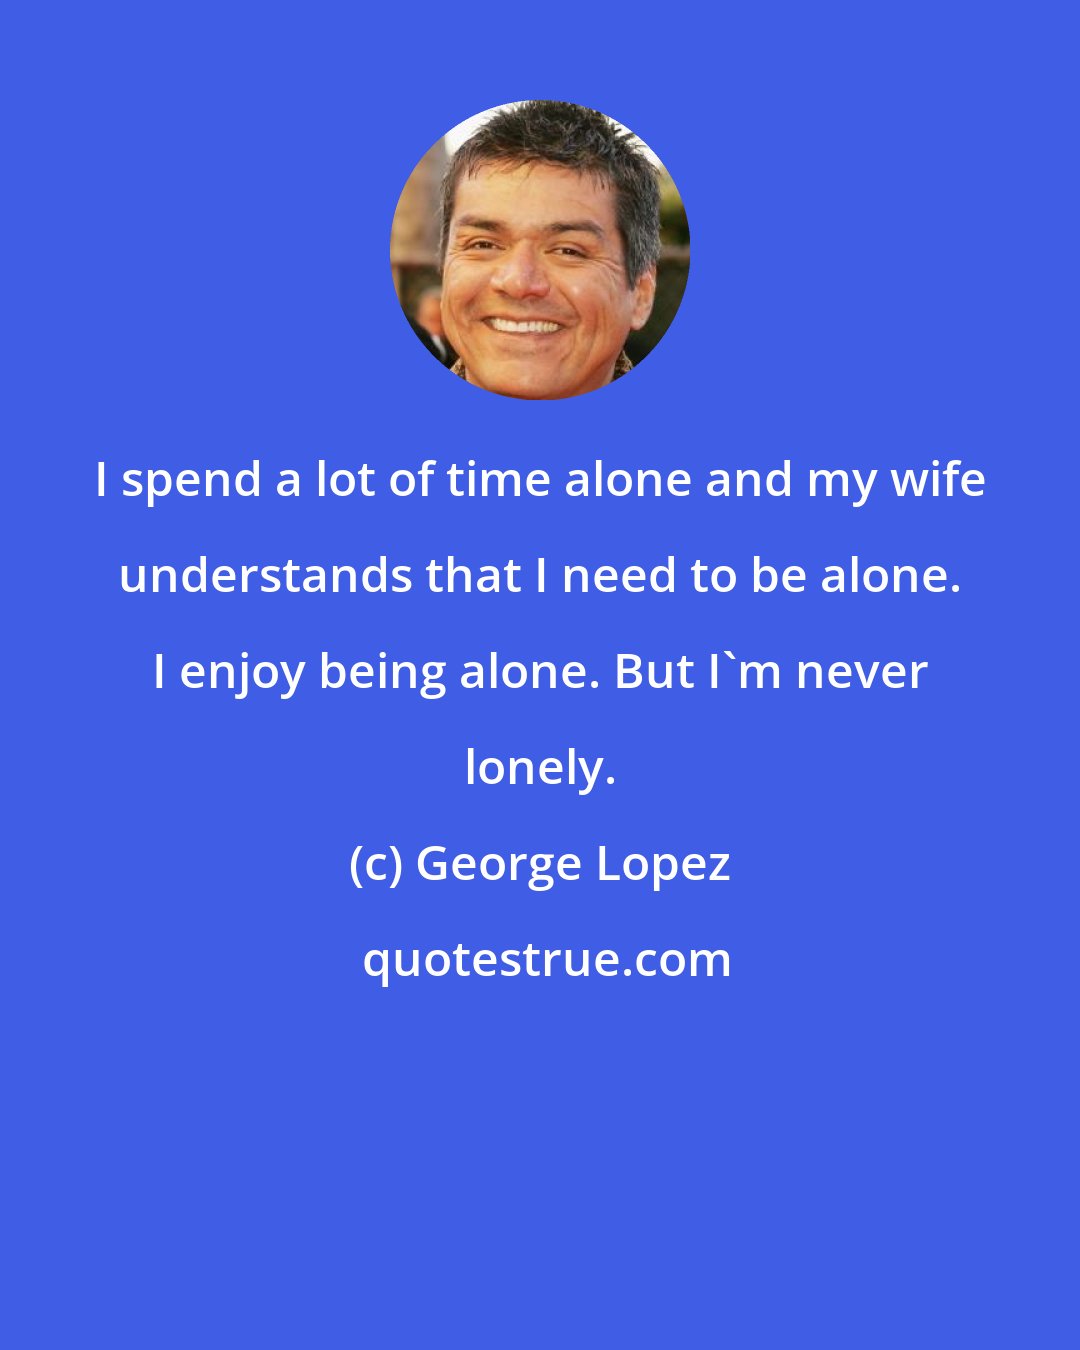 George Lopez: I spend a lot of time alone and my wife understands that I need to be alone. I enjoy being alone. But I'm never lonely.